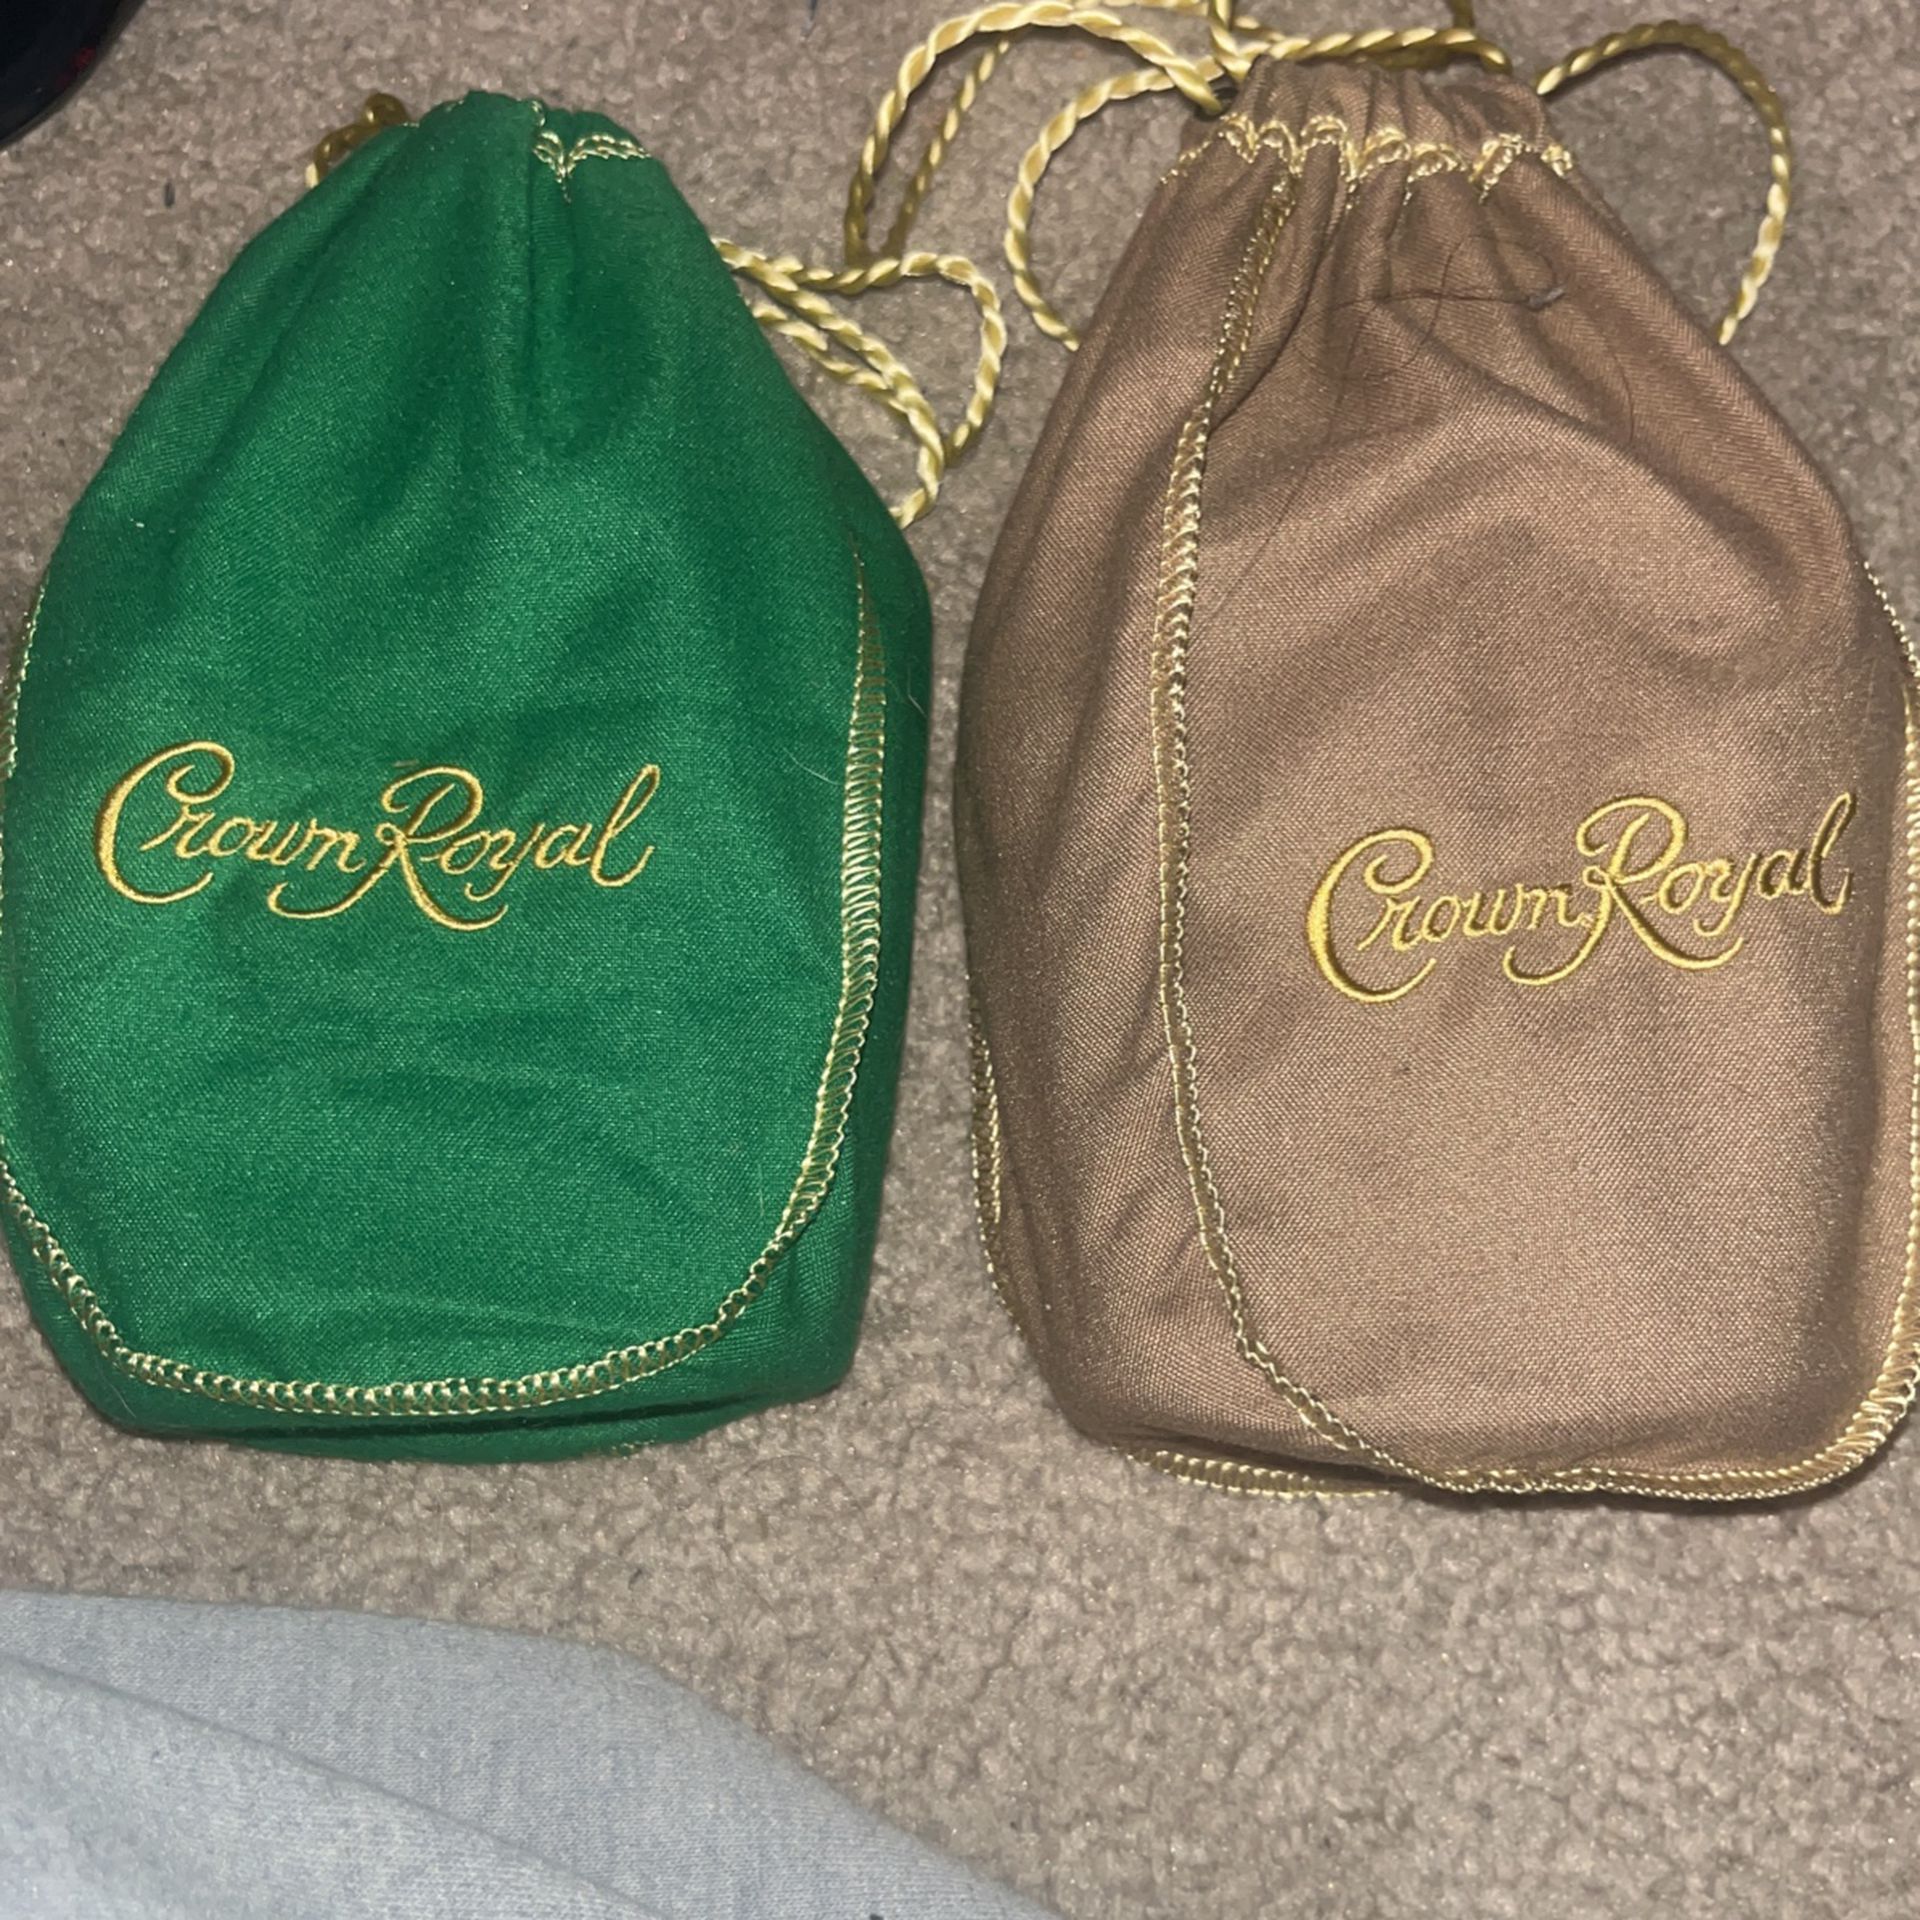 Crown Royal Bags (with empty bottle inside) 5$ Each